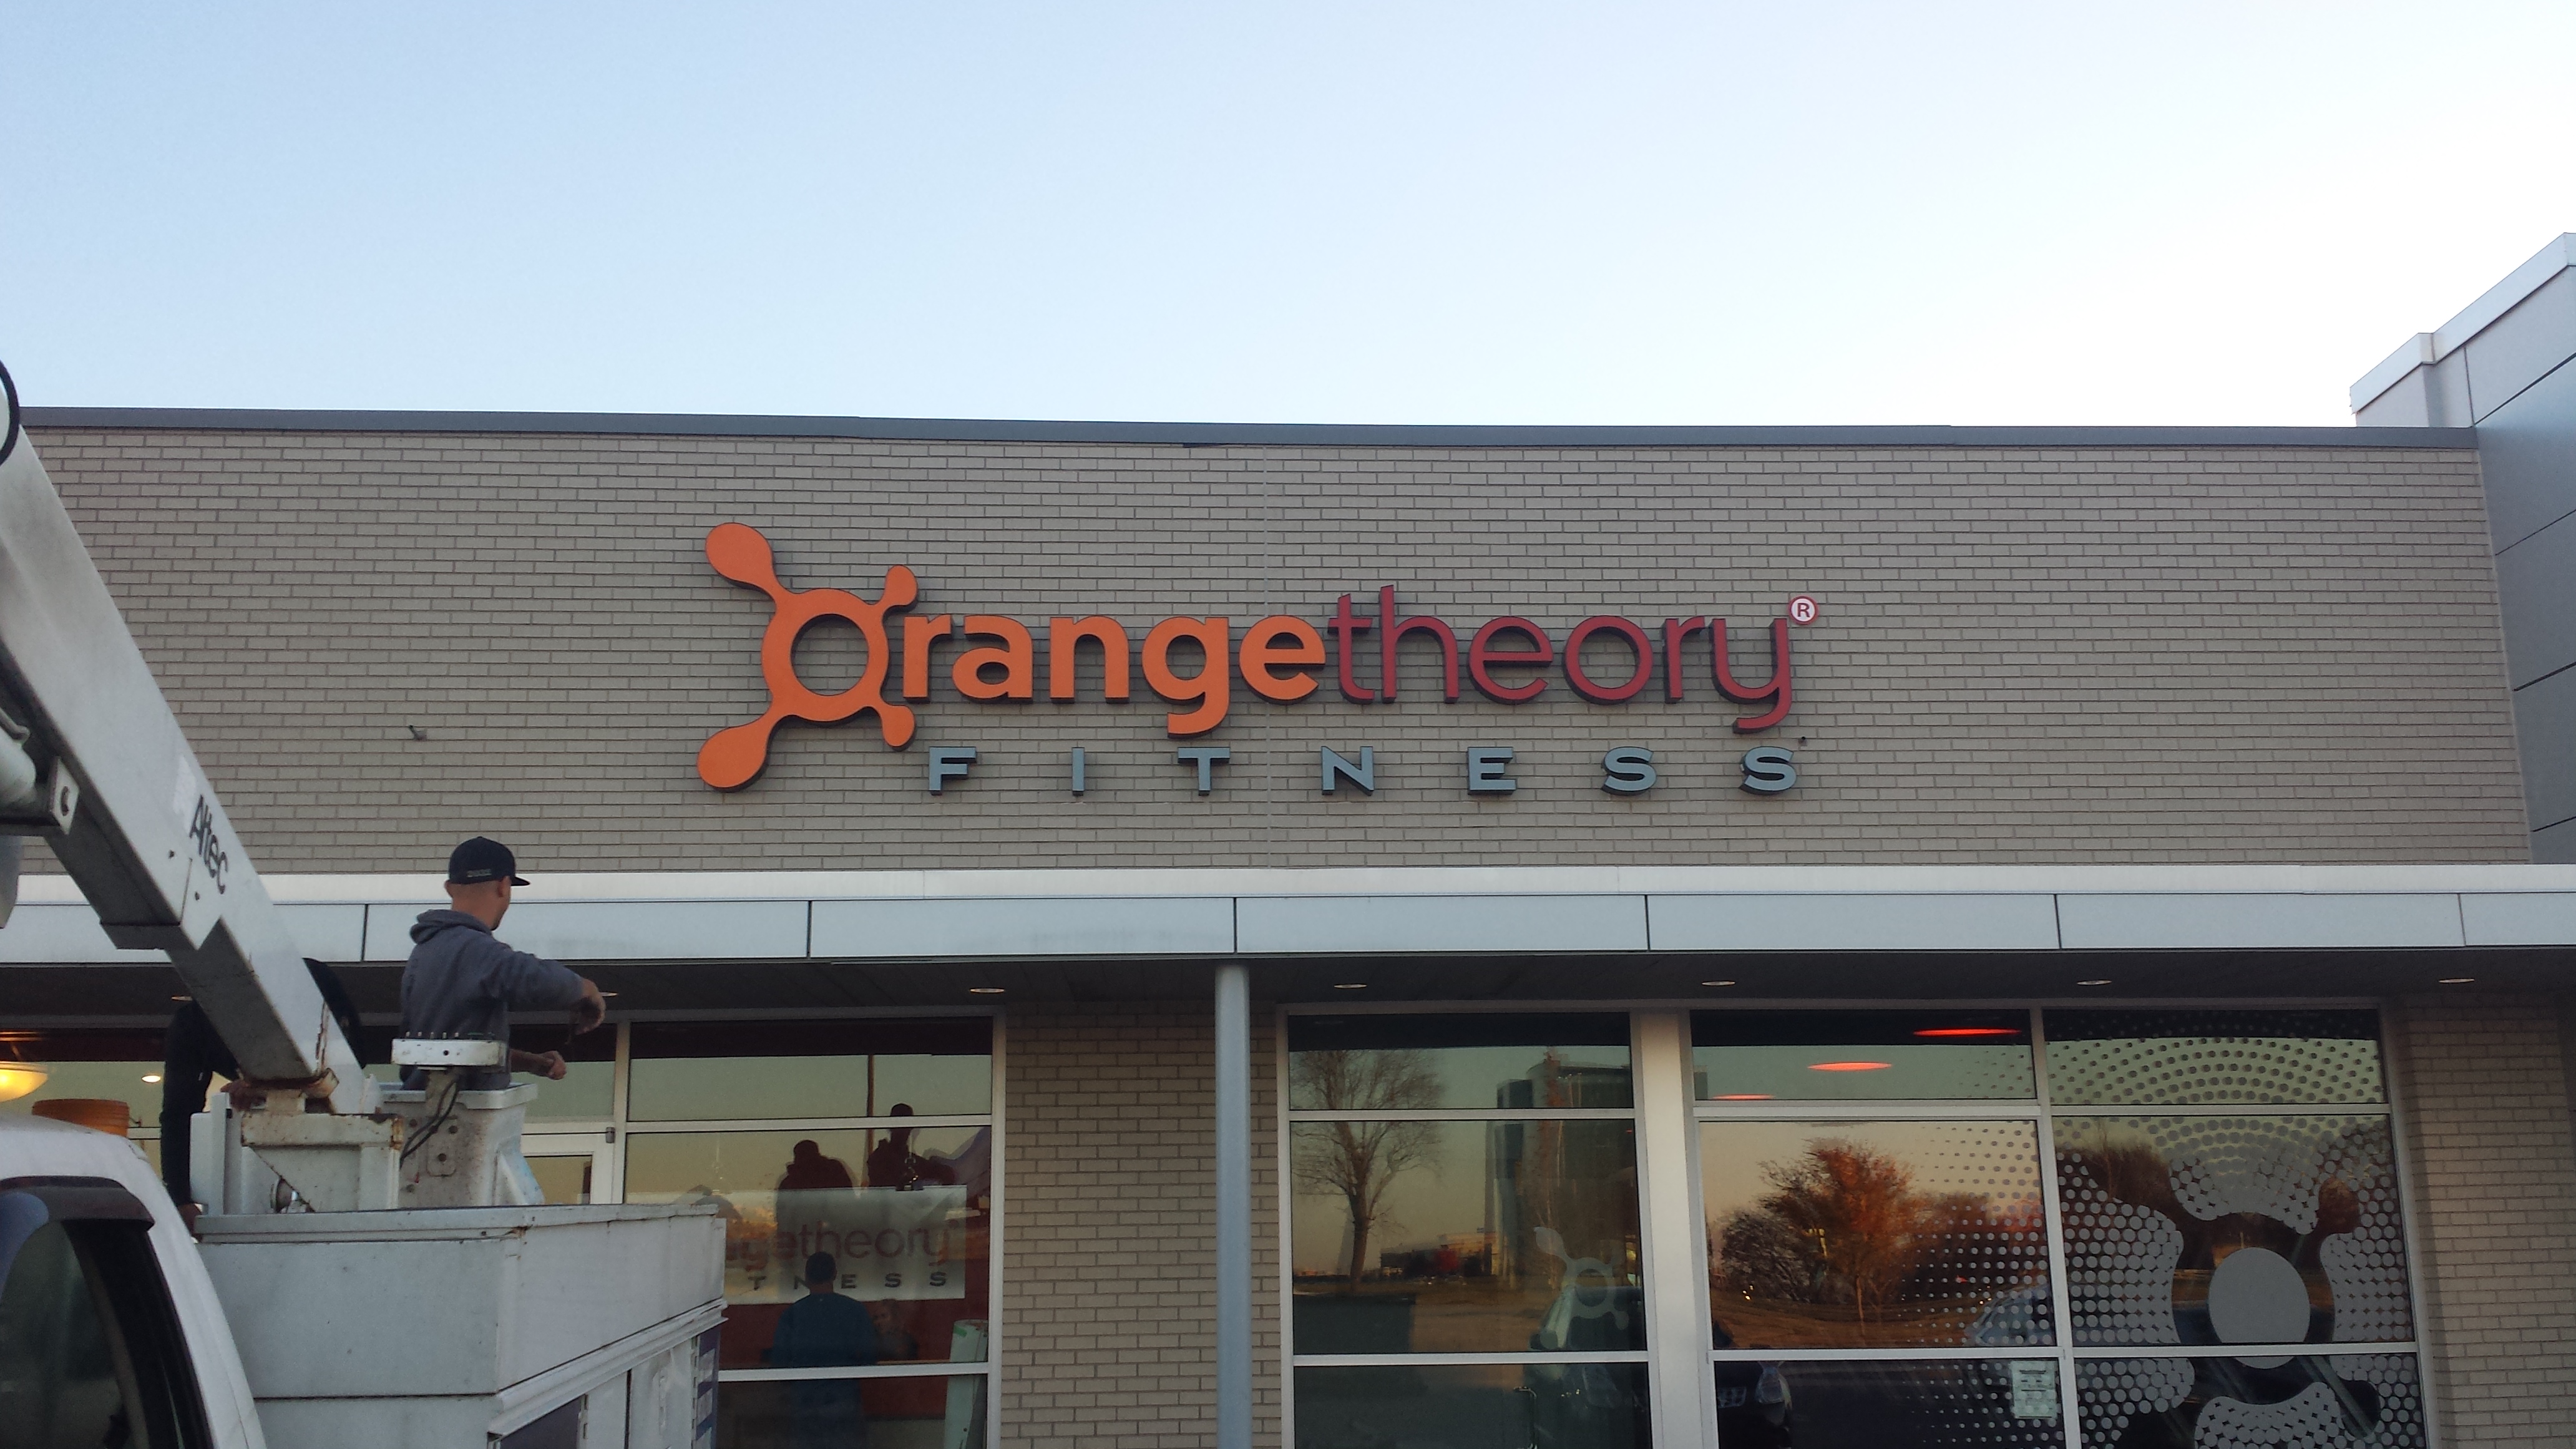 Orange Theory Fitness Channel Letters